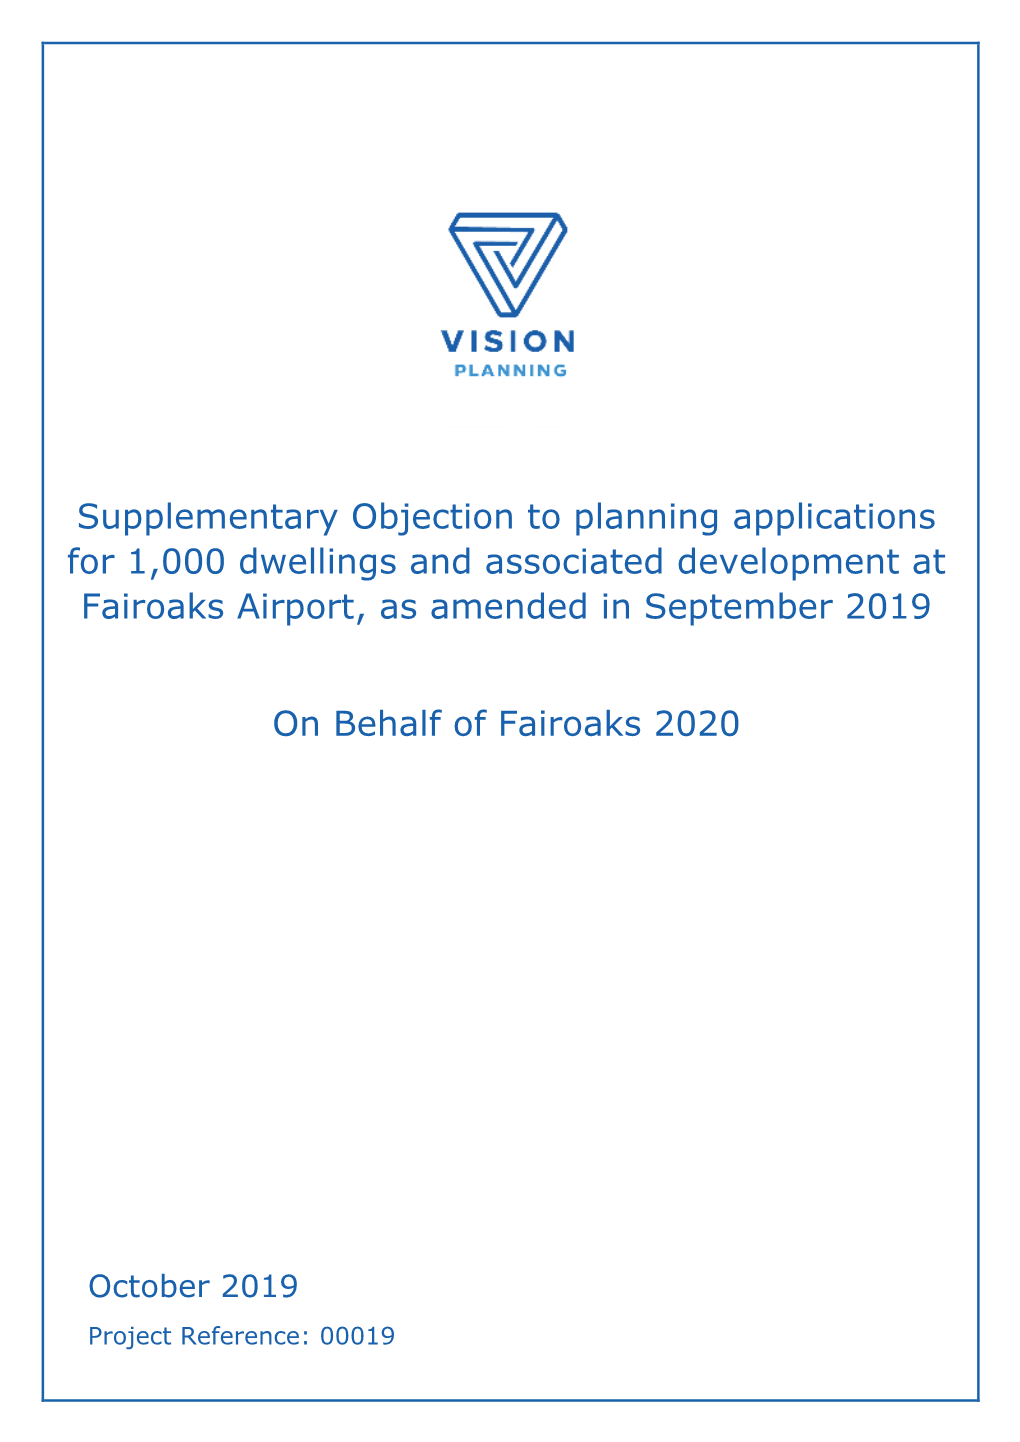 Supplementary Objection to Planning Applications for 1,000 Dwellings and Associated Development at Fairoaks Airport, As Amended in September 2019